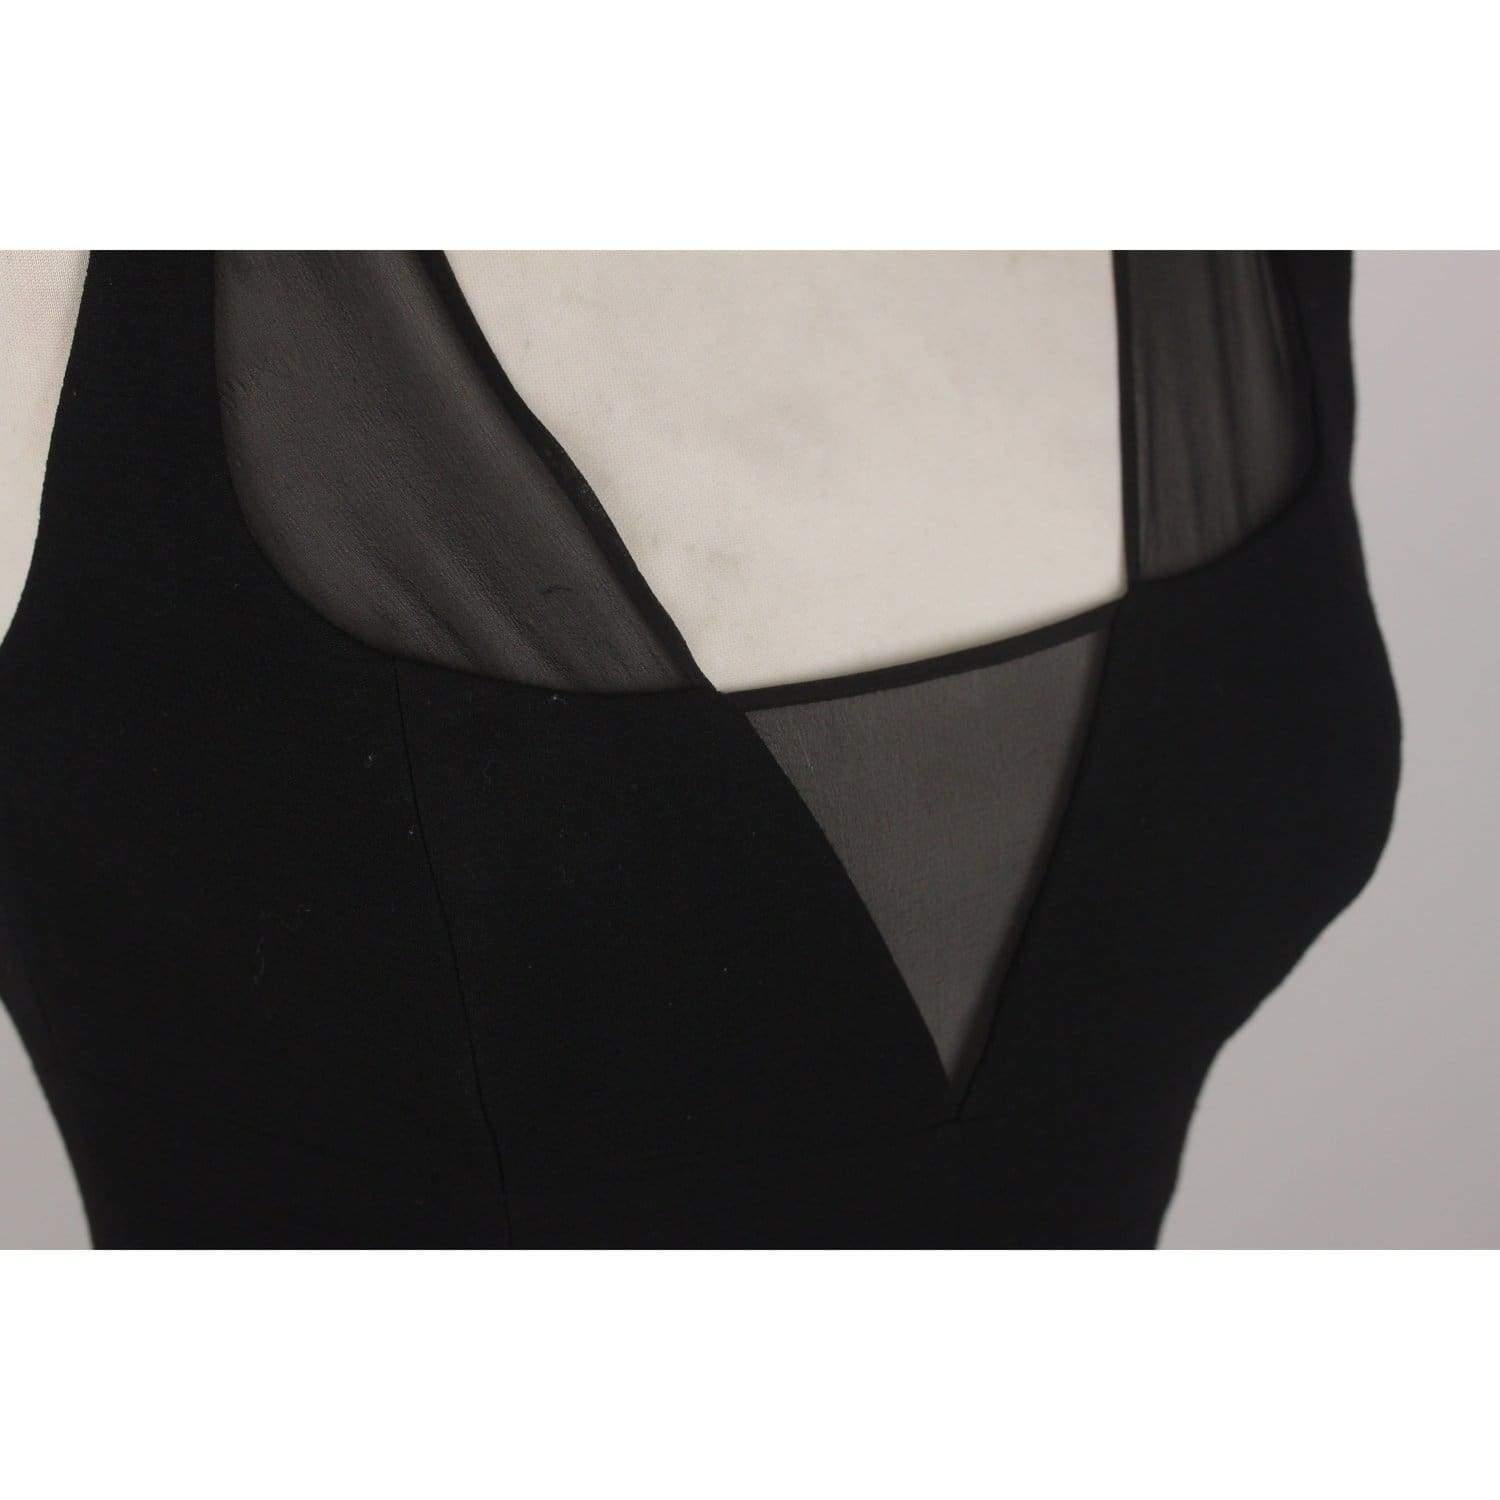 MATERIAL: Wool COLOR: Black MODEL: Little Black Dress GENDER: Women SIZE: Extra-Small COUNTRY OF MANUFACTURE: Italy Condition CONDITION DETAILS: A :EXCELLENT CONDITION - Used once or twice. Looks mint. Imperceptible signs of wear Measurements